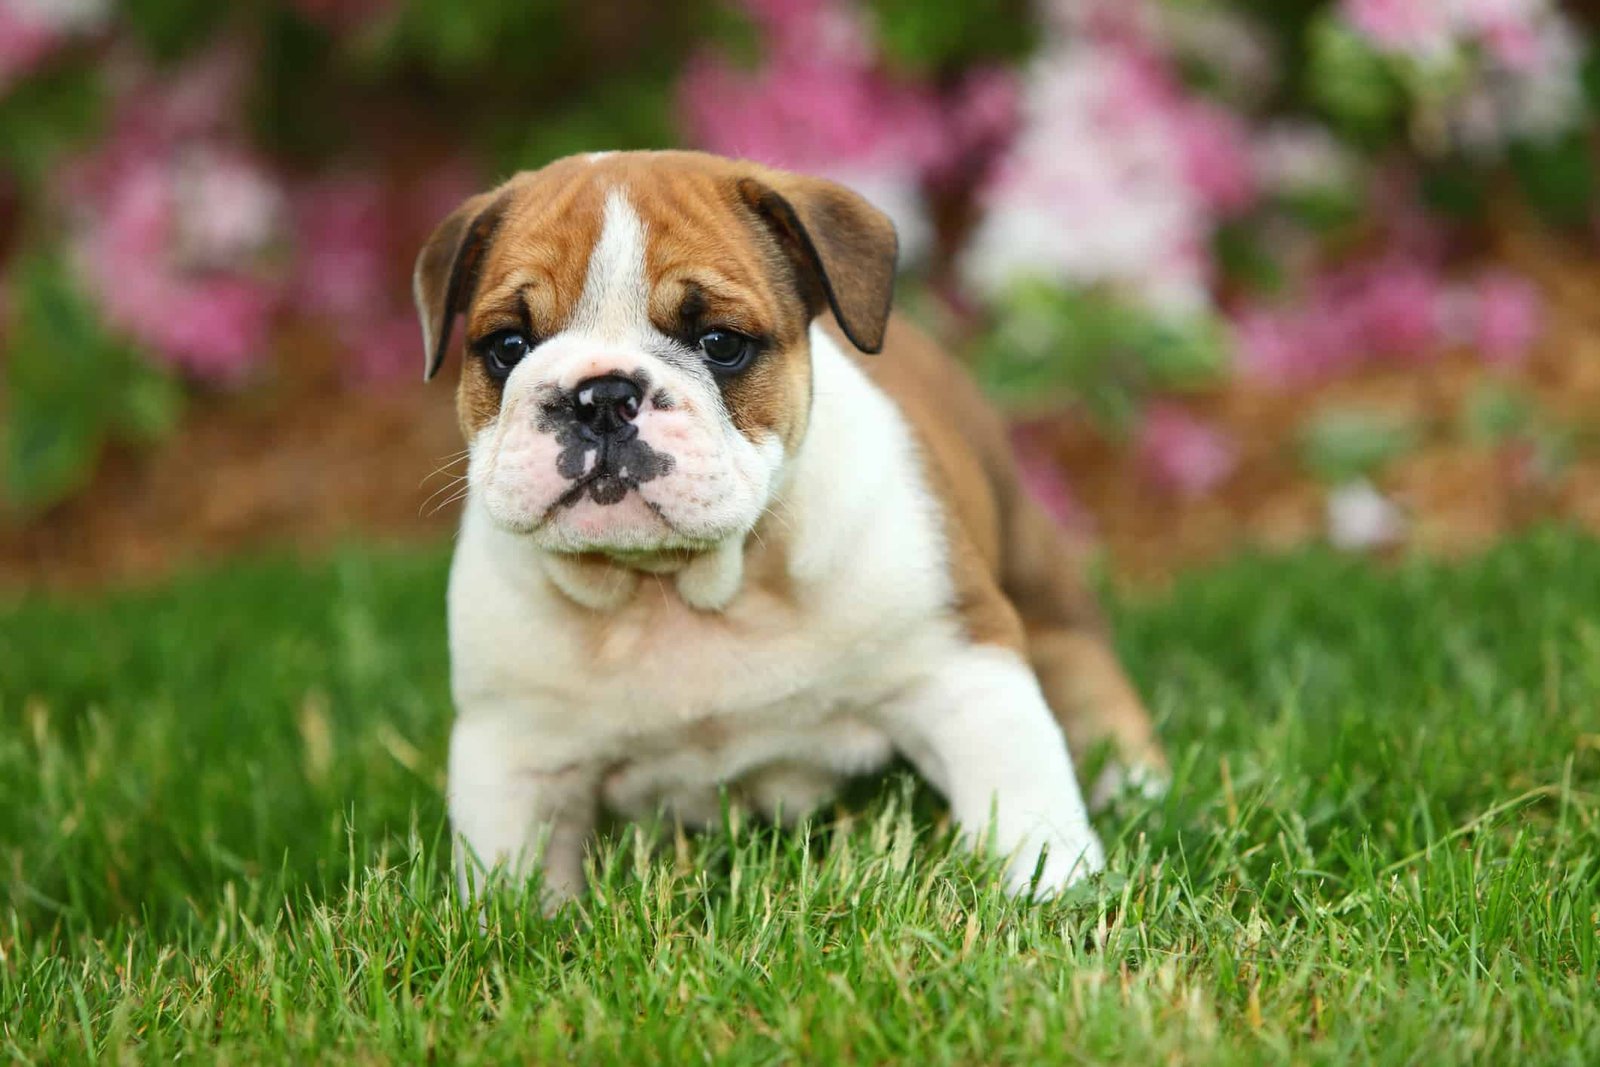 The Bulldog: A Muscular and Wrinkled Medium-Sized Dog Breed